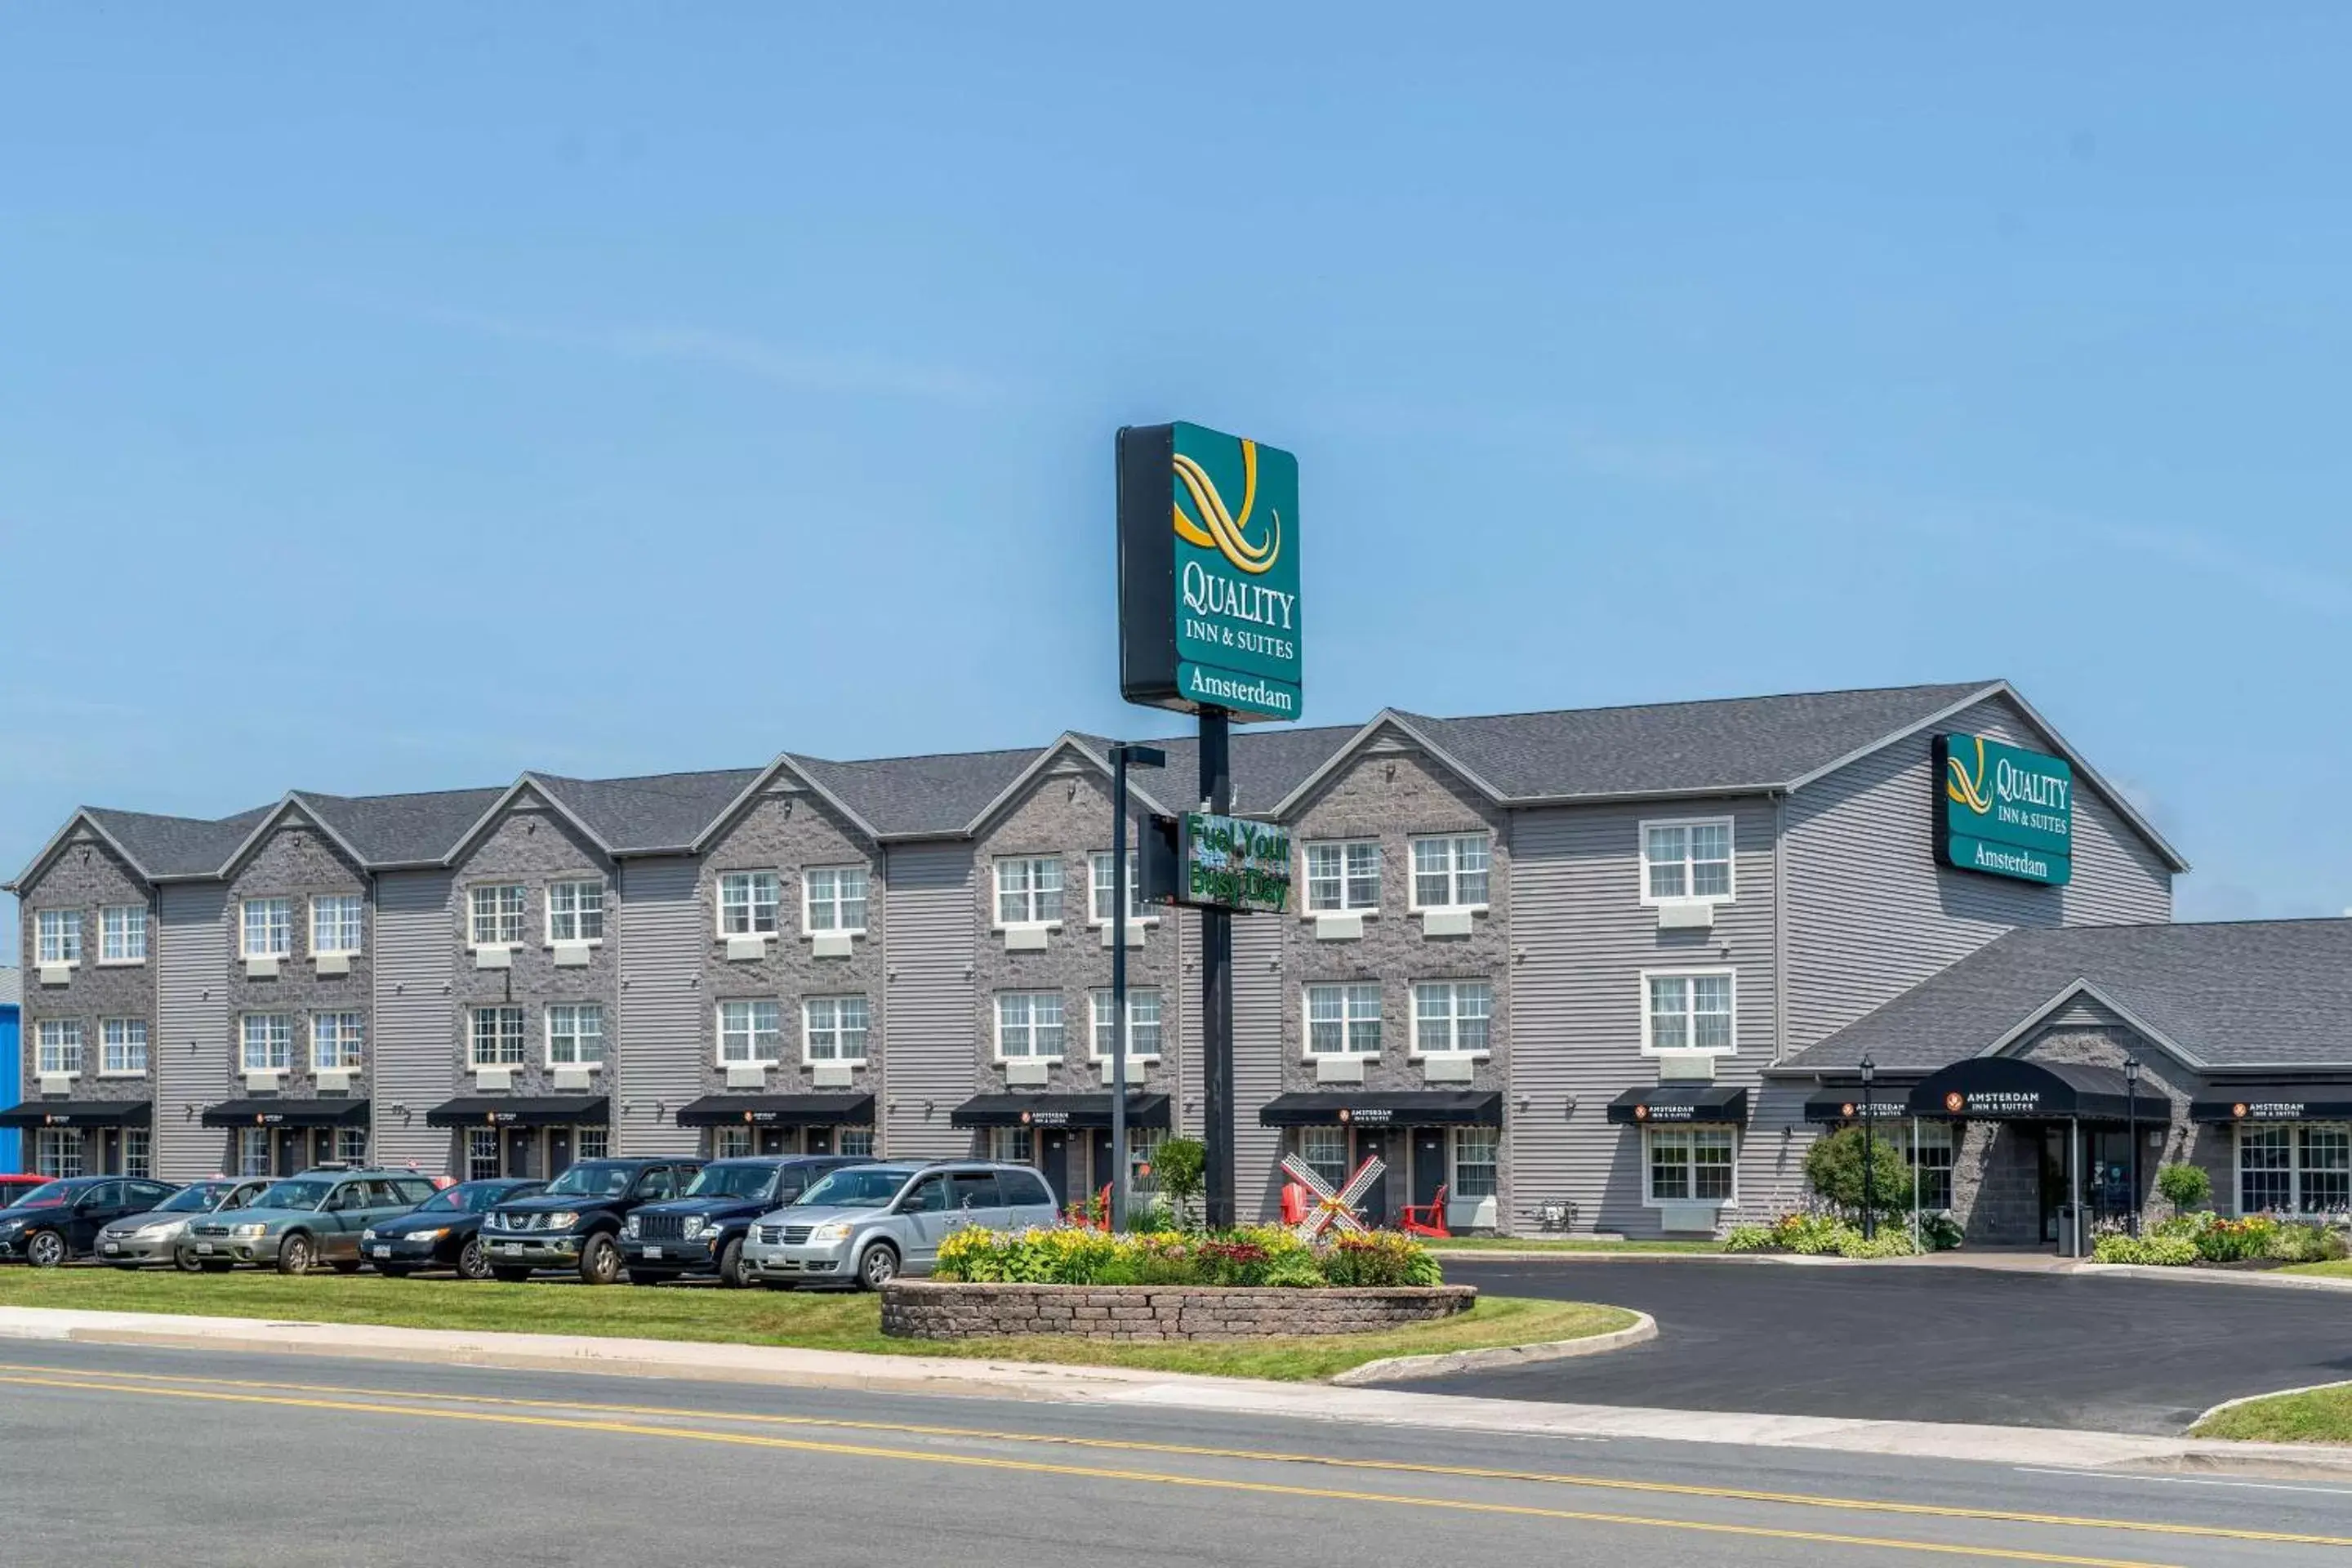 Property Building in Quality Inn Amsterdam Fredericton